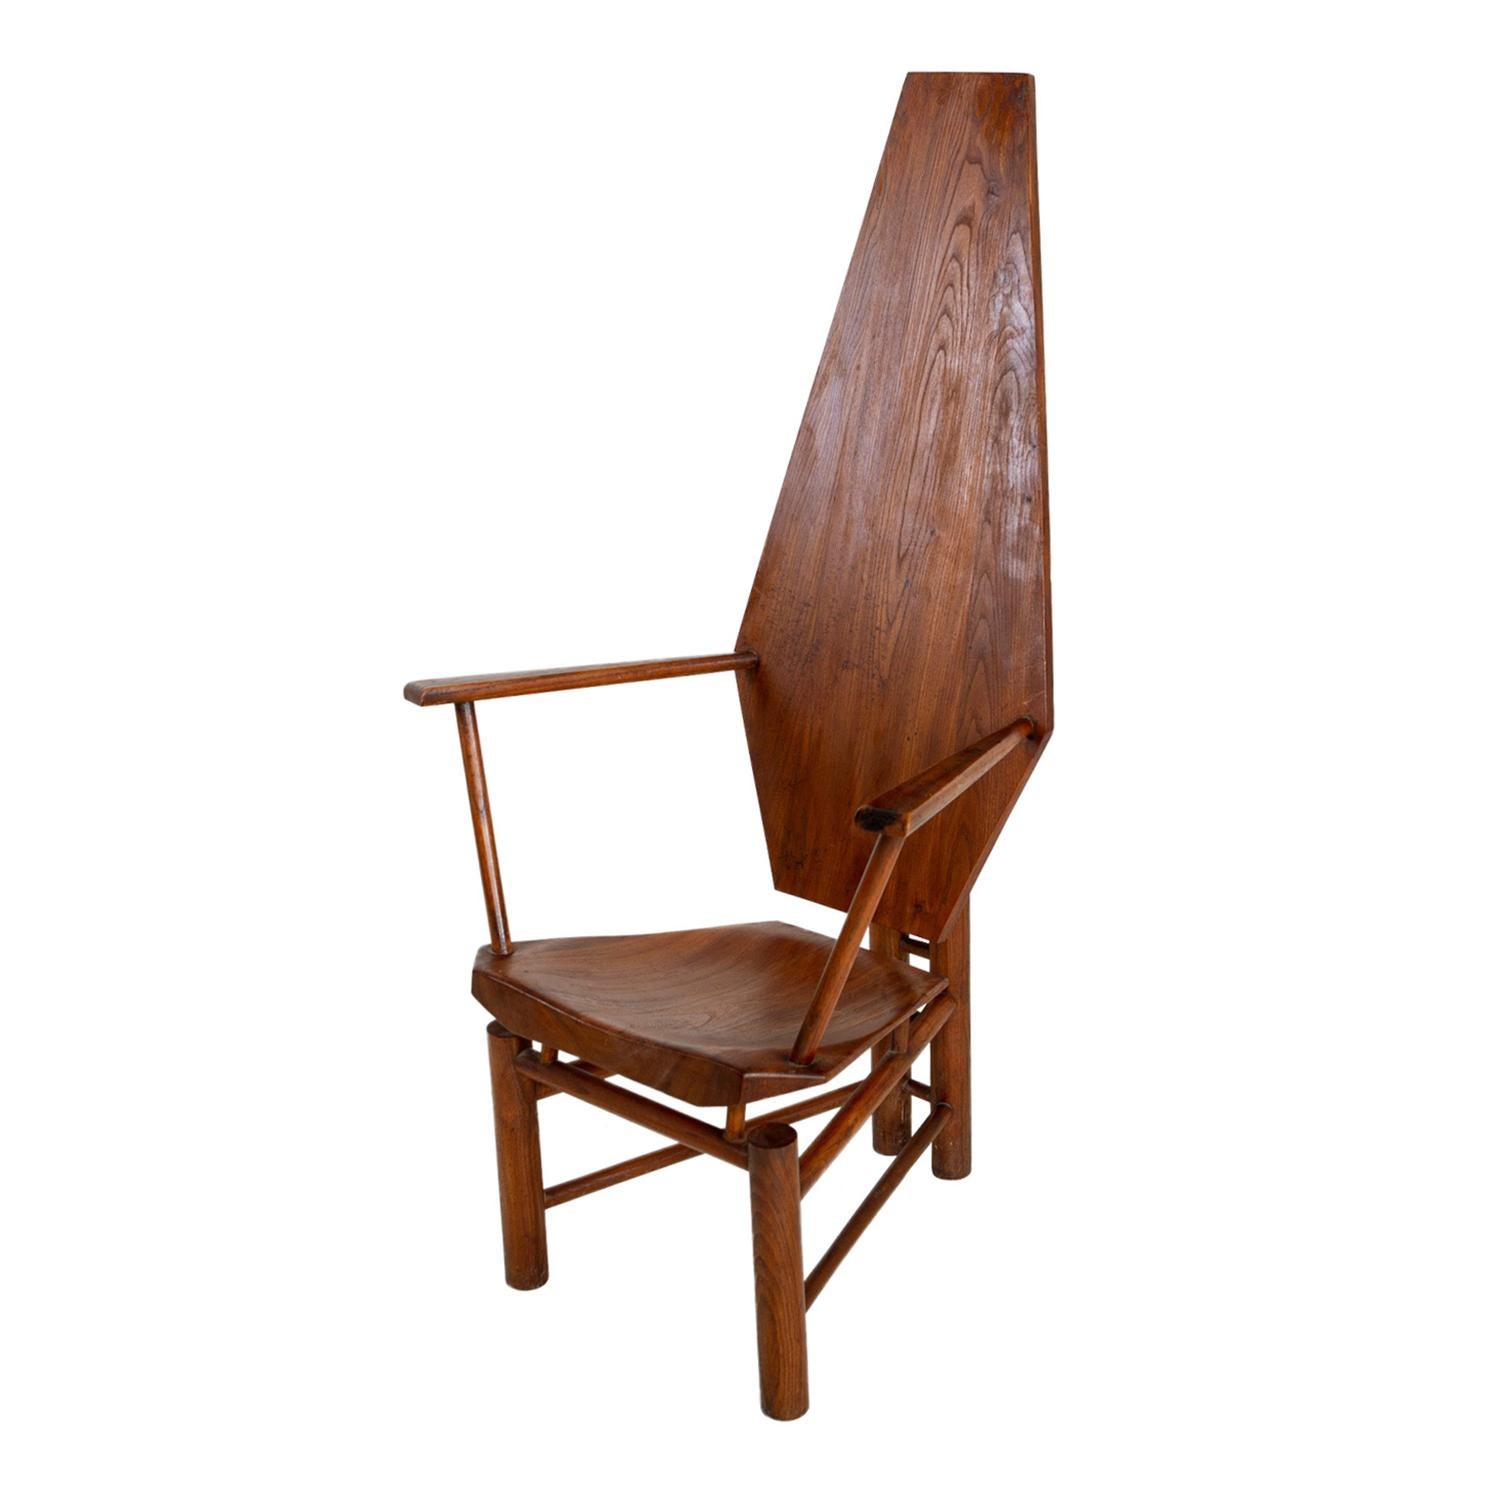 A single, vintage Mid-Century modern Italian sculptural center chair made of hand crafted polished Walnut, in good condition. The side, end chair is enhanced by a hexagonal backrest and a base constructed of cylindrical wooden struts, standing on